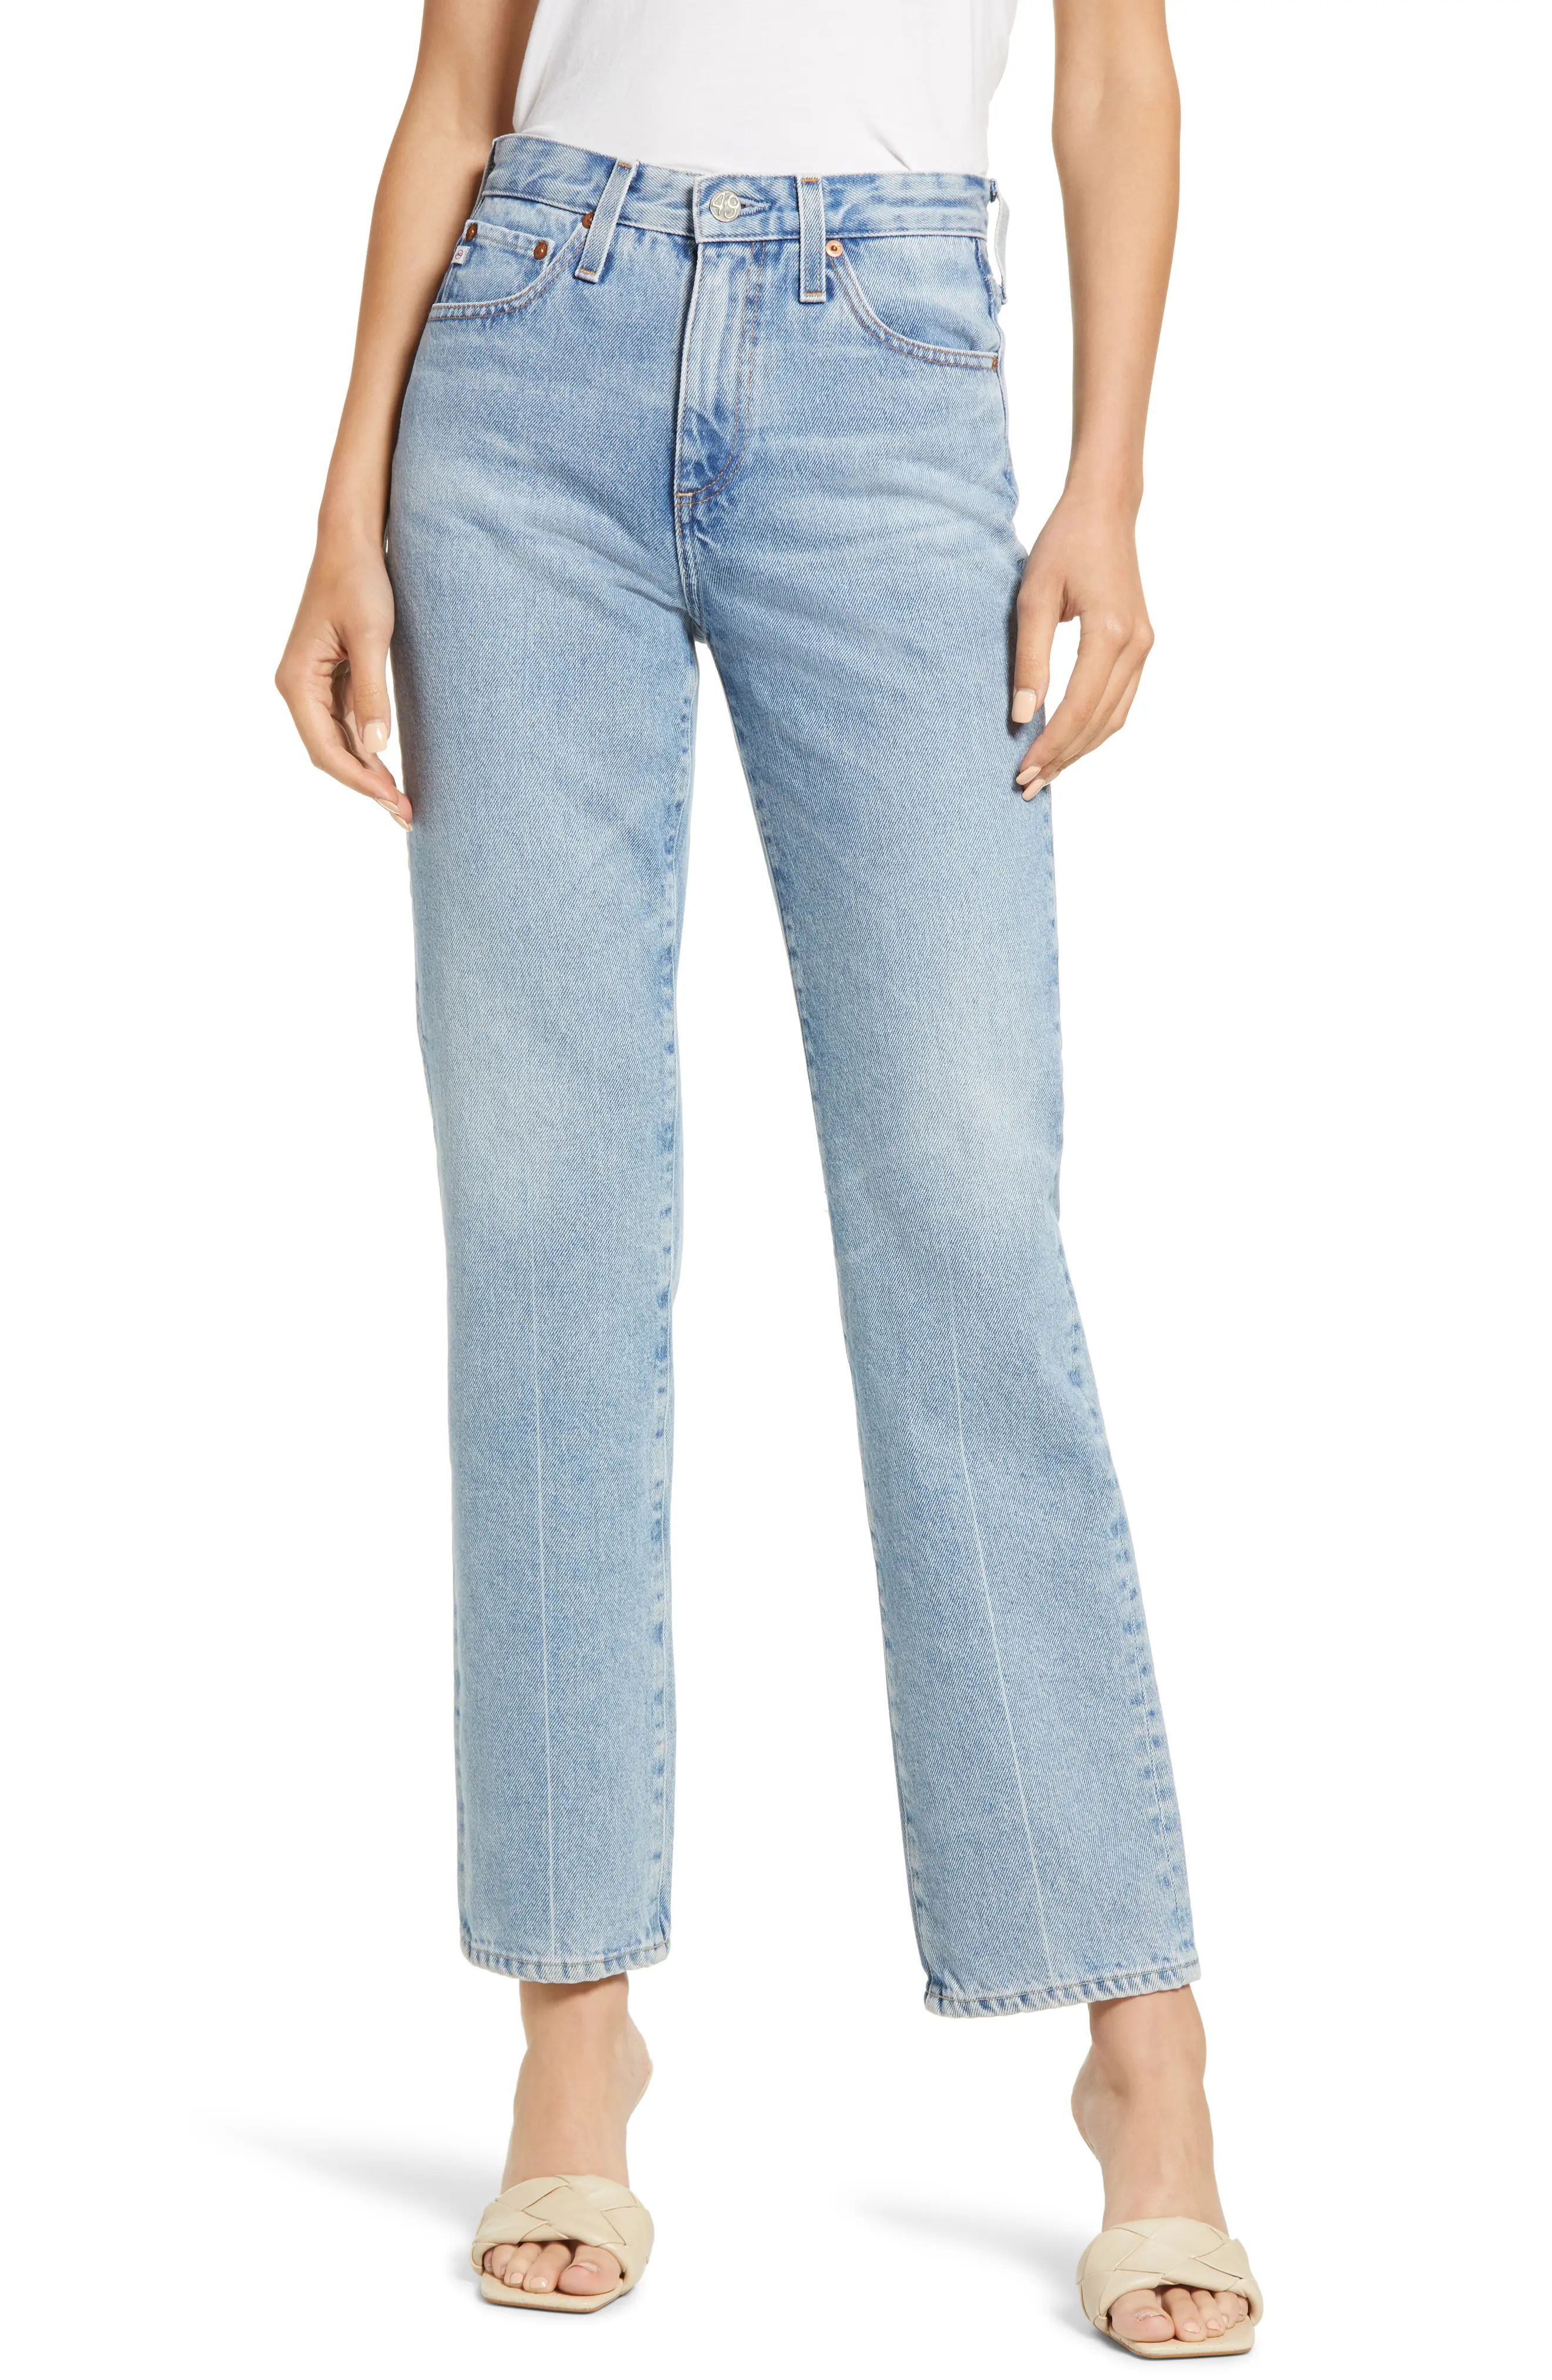 AG Alexxis High Waist Straight Leg Jeans, Size 32 in 21 Years Westside at Nordstrom | Nordstrom